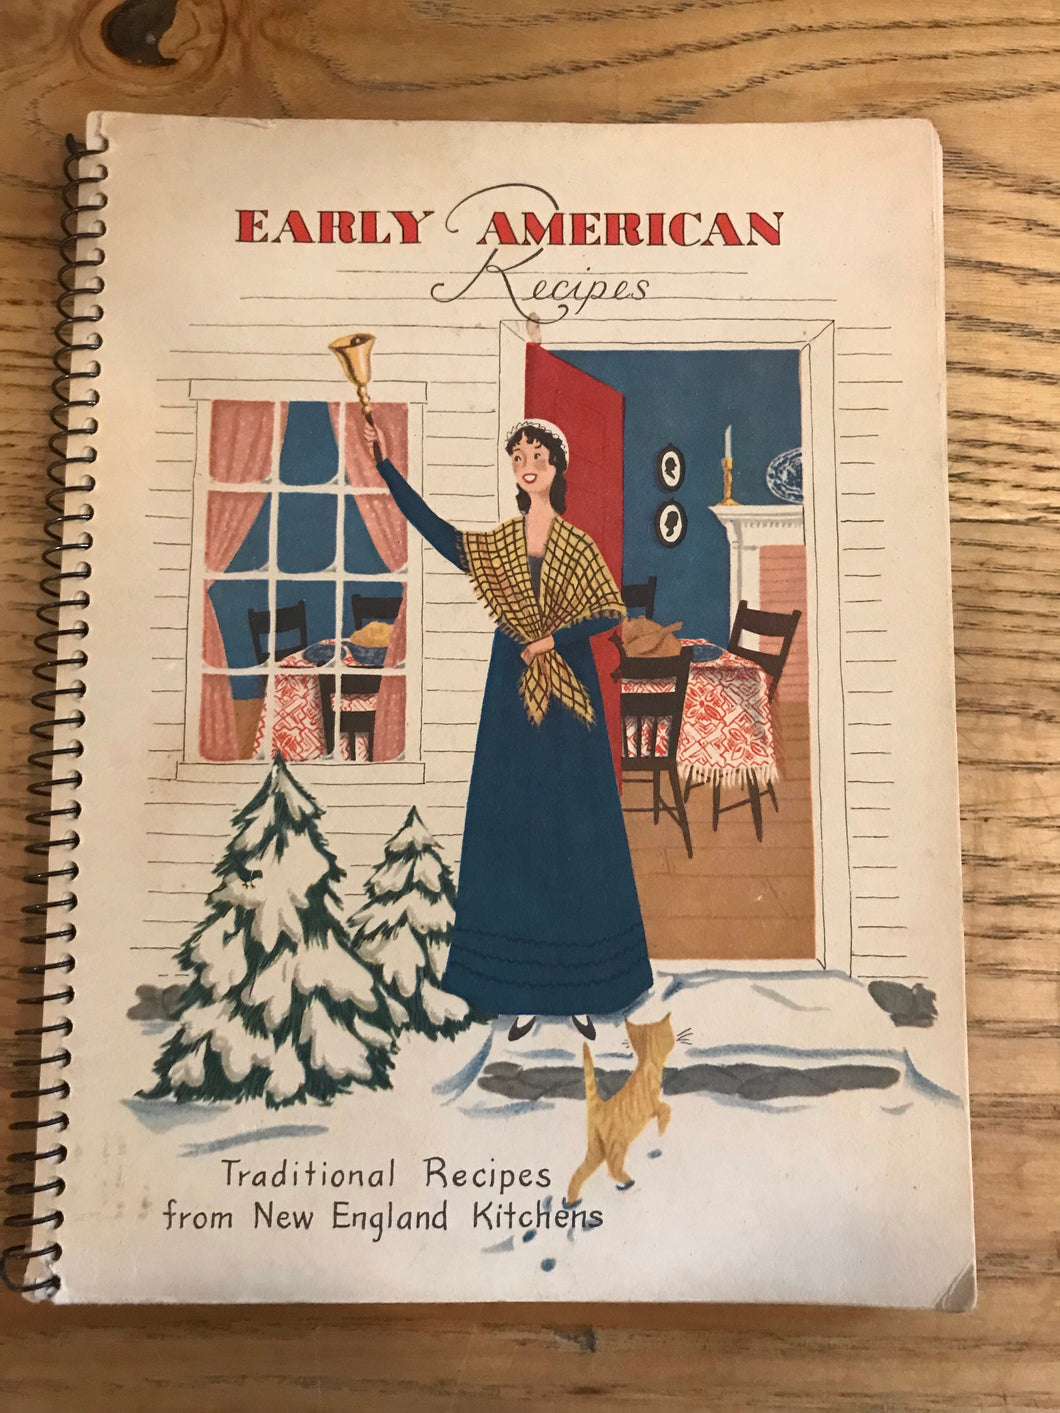 Early American Recipes, Traditional Recipes from New England Kitchens